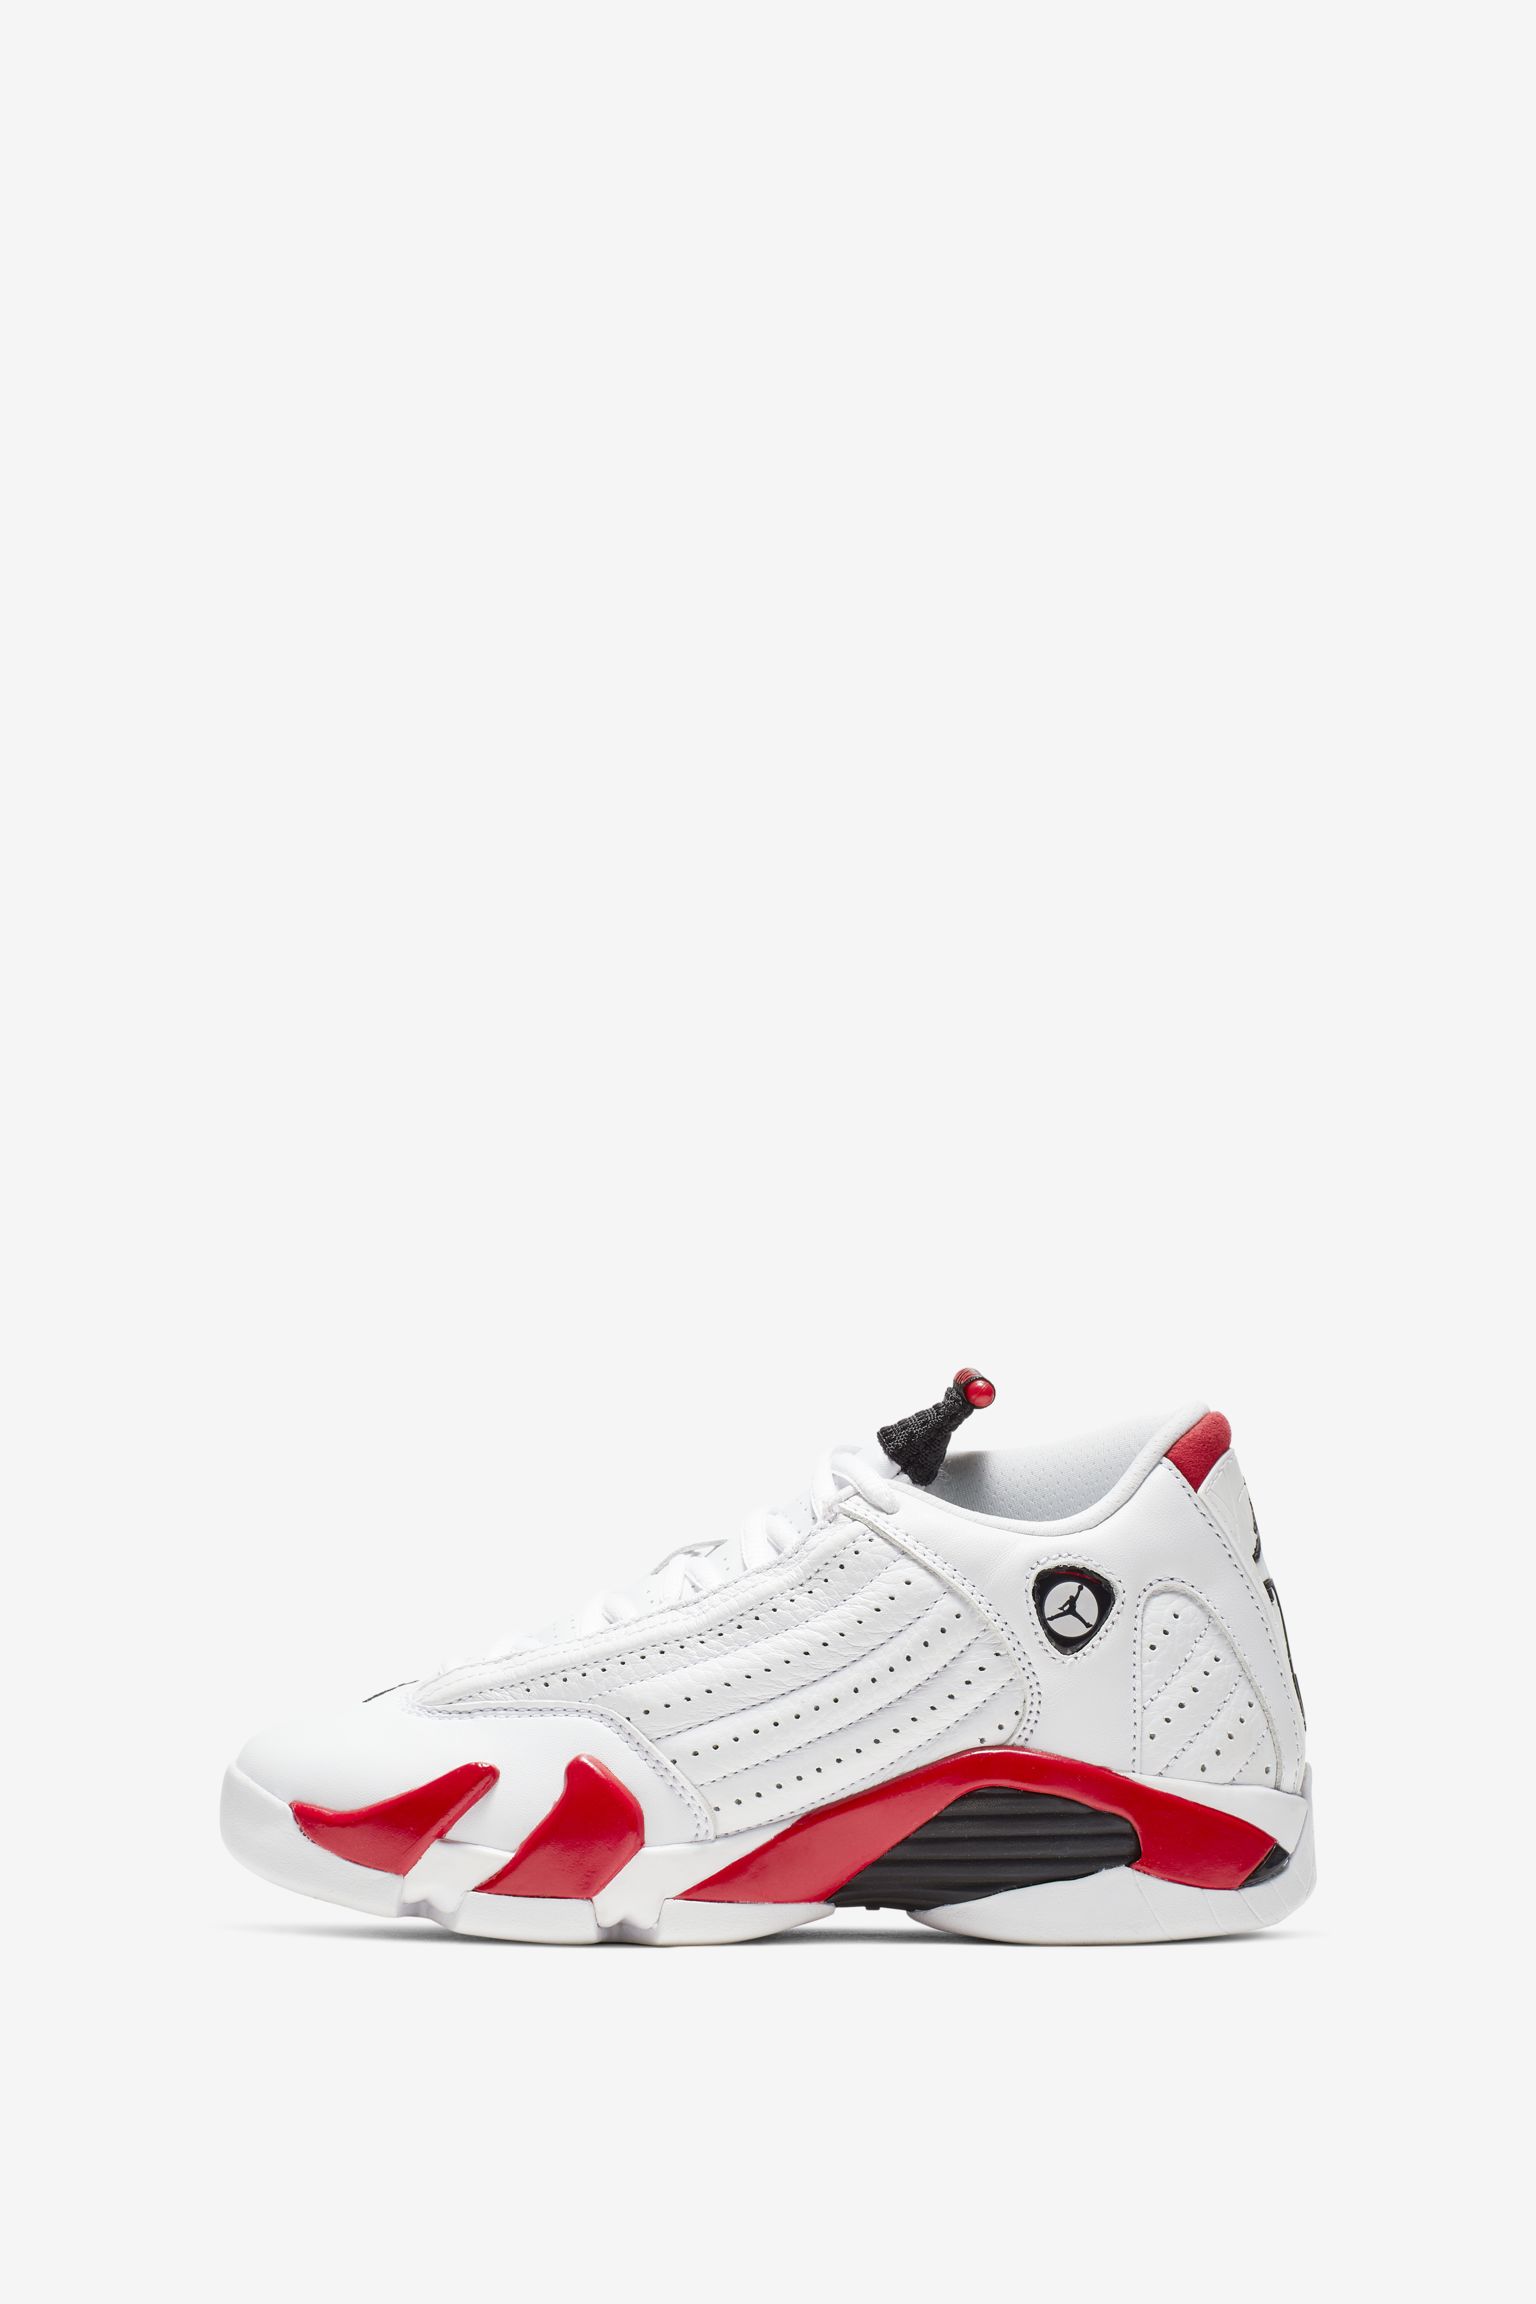 red and white jordan 14